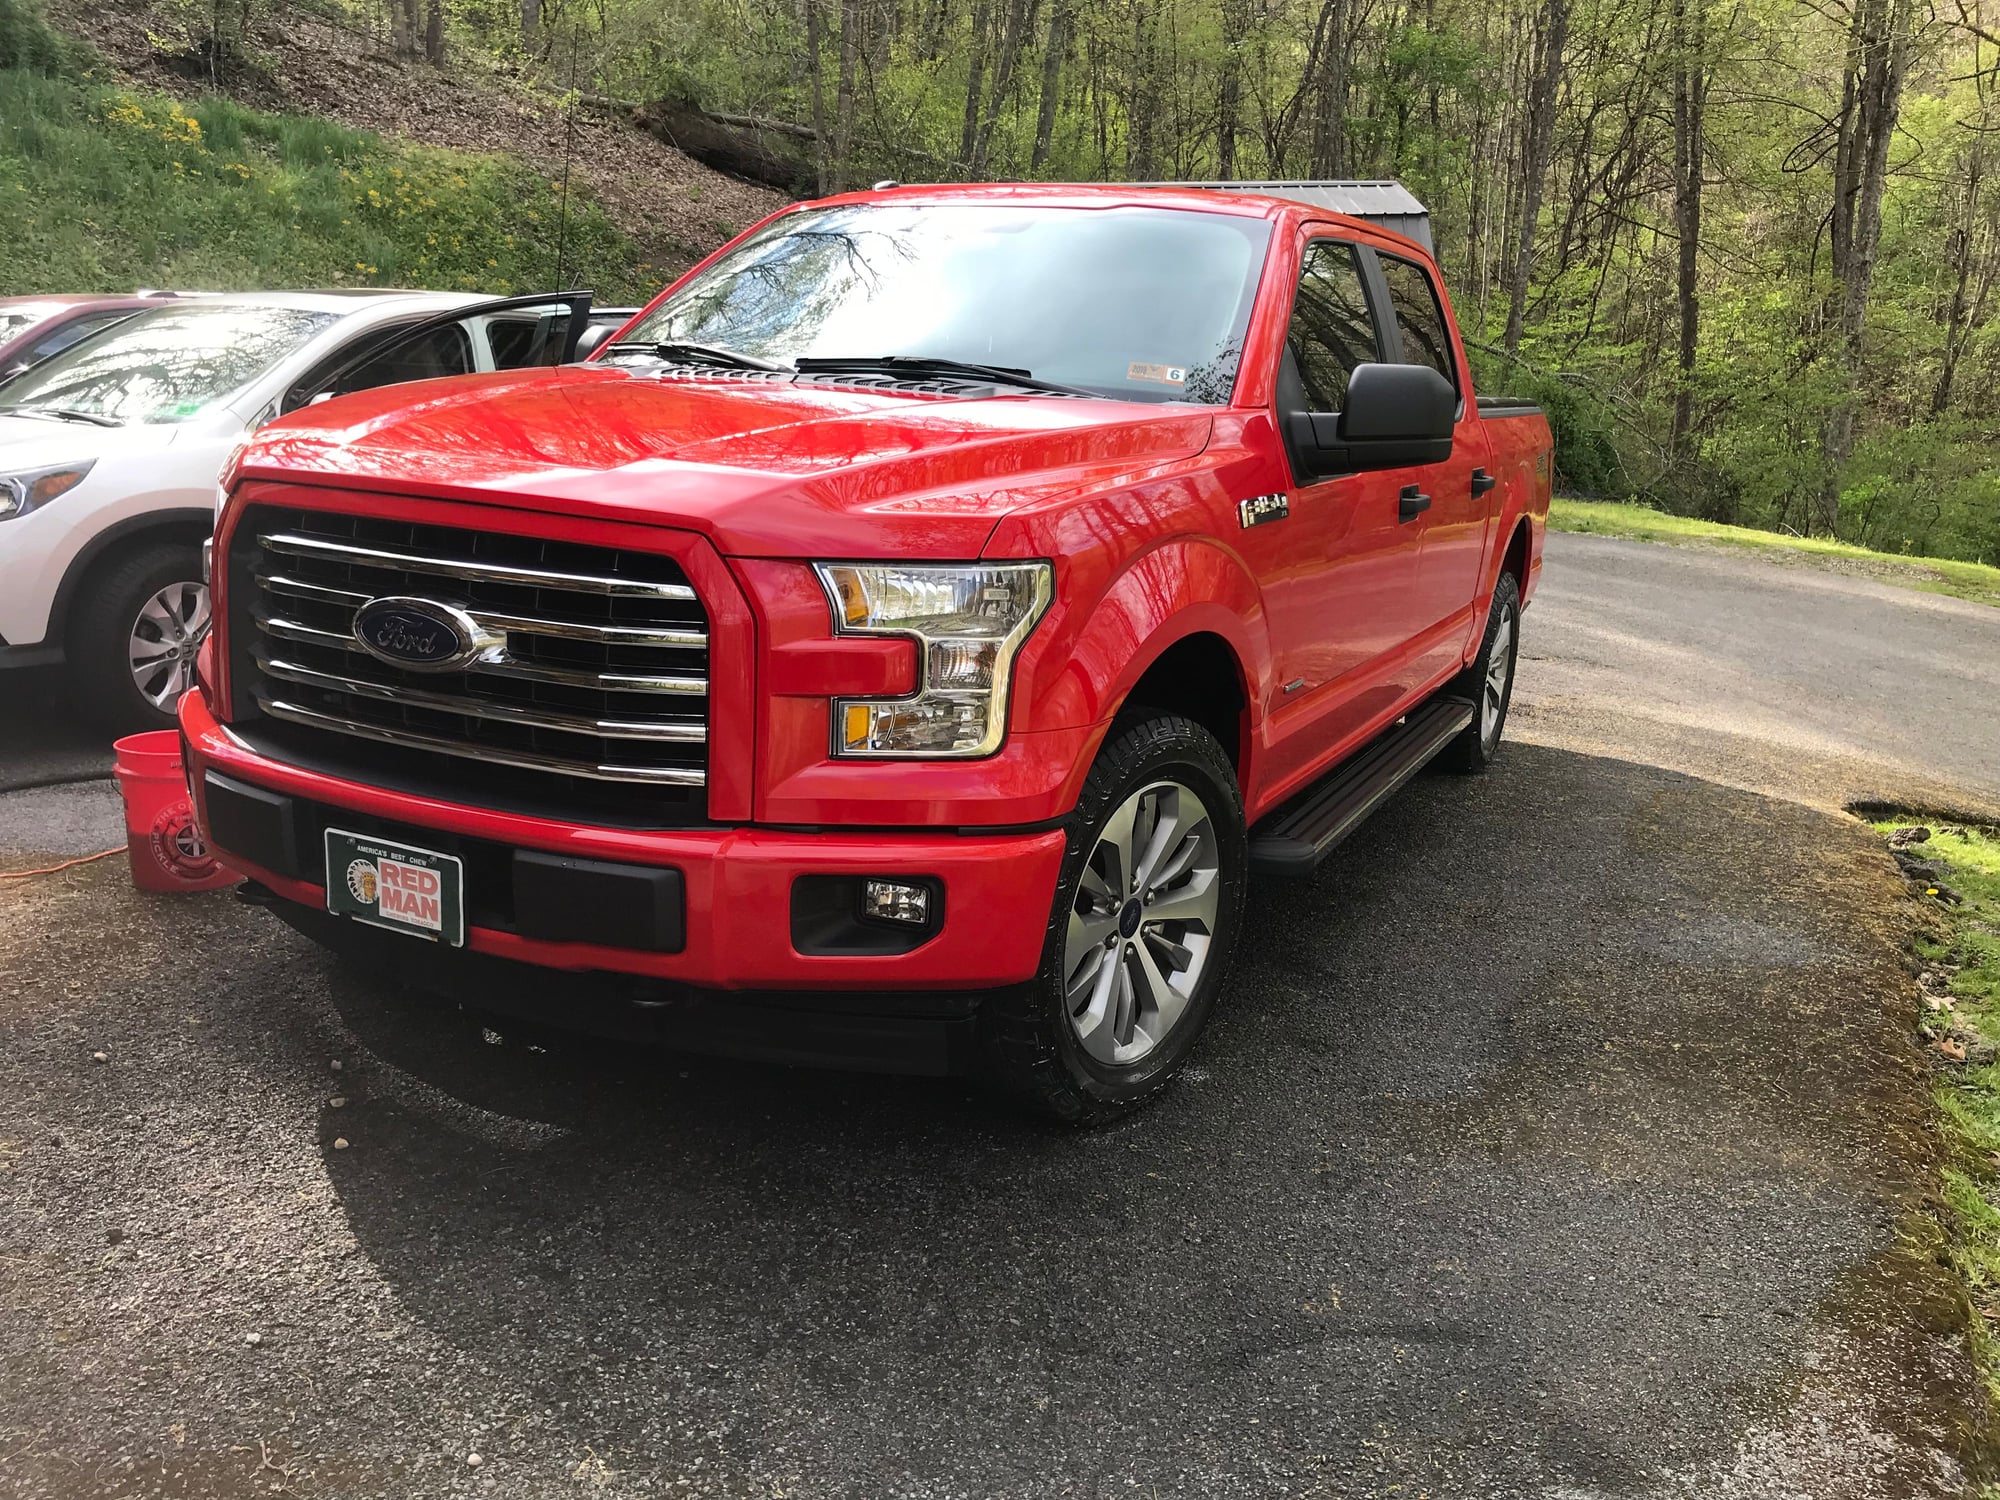 2.7 ecoboost long term updates - Page 3 - Ford F150 Forum - Community 2015 Ford F 150 2.7 Ecoboost Problems